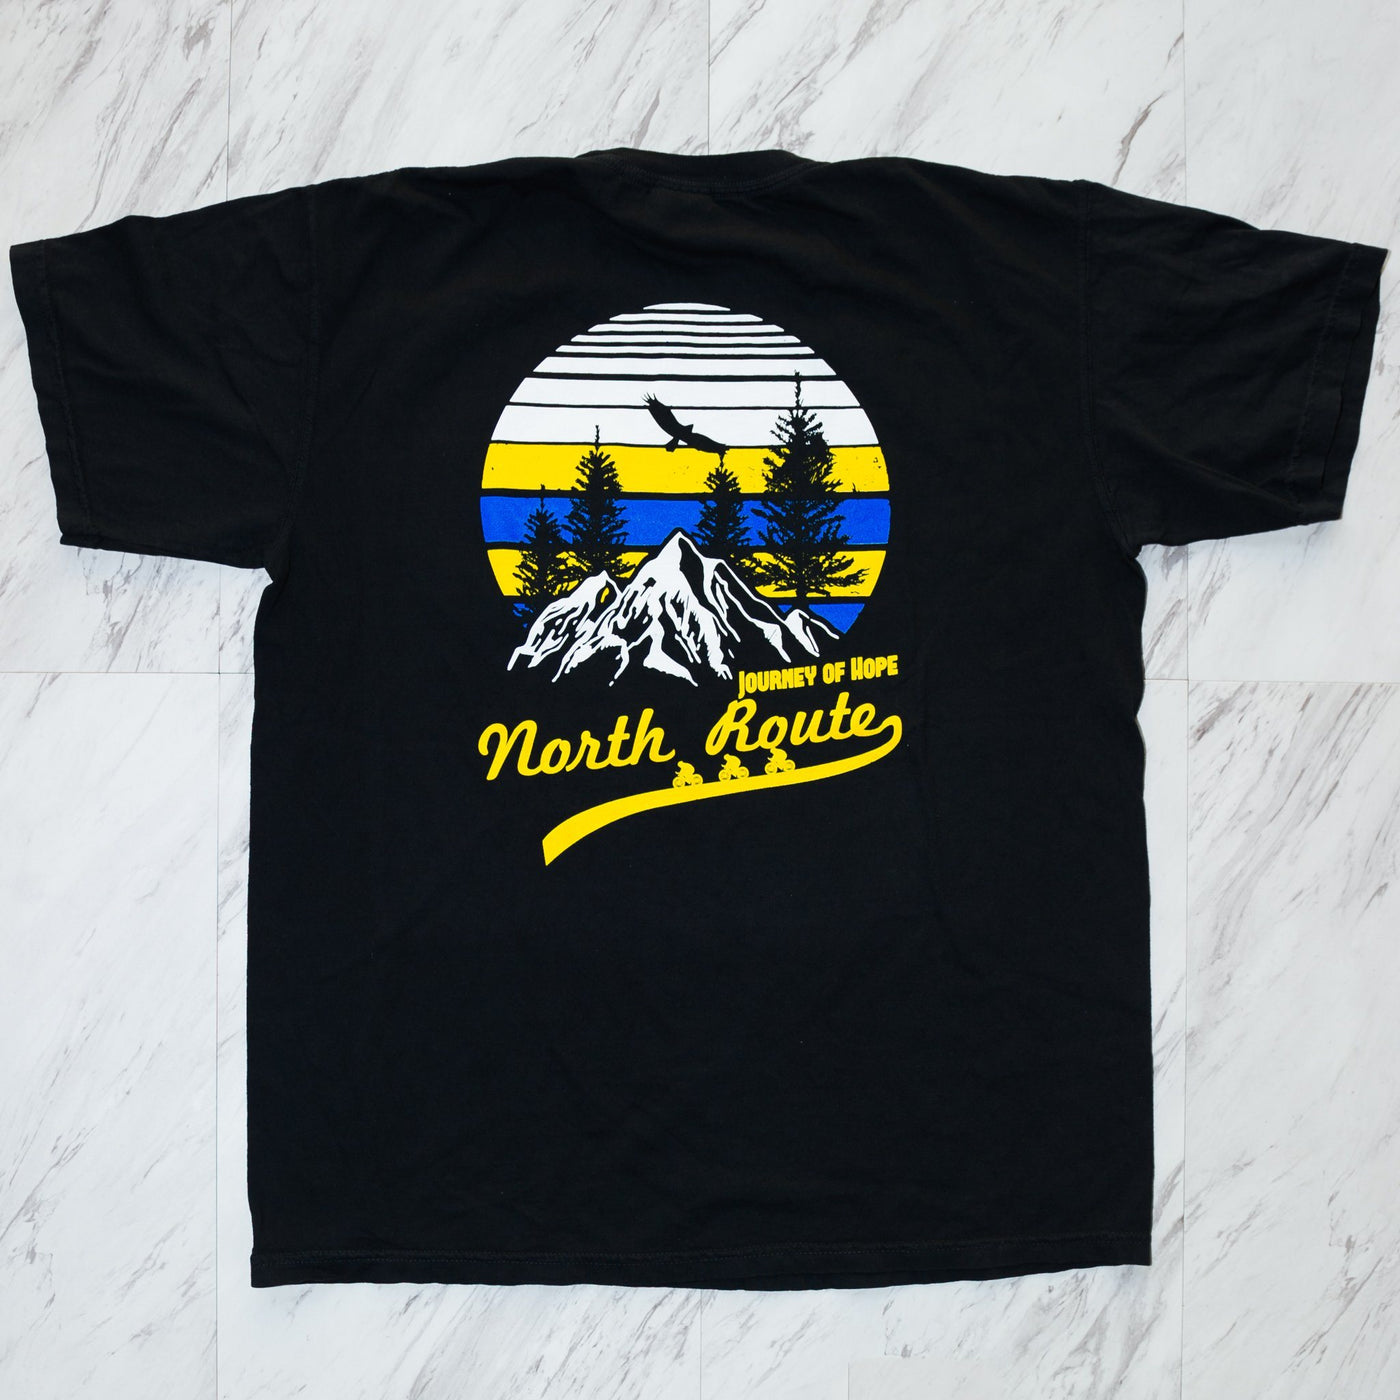 pi kappa phi journey of hope north route 2019 shirt